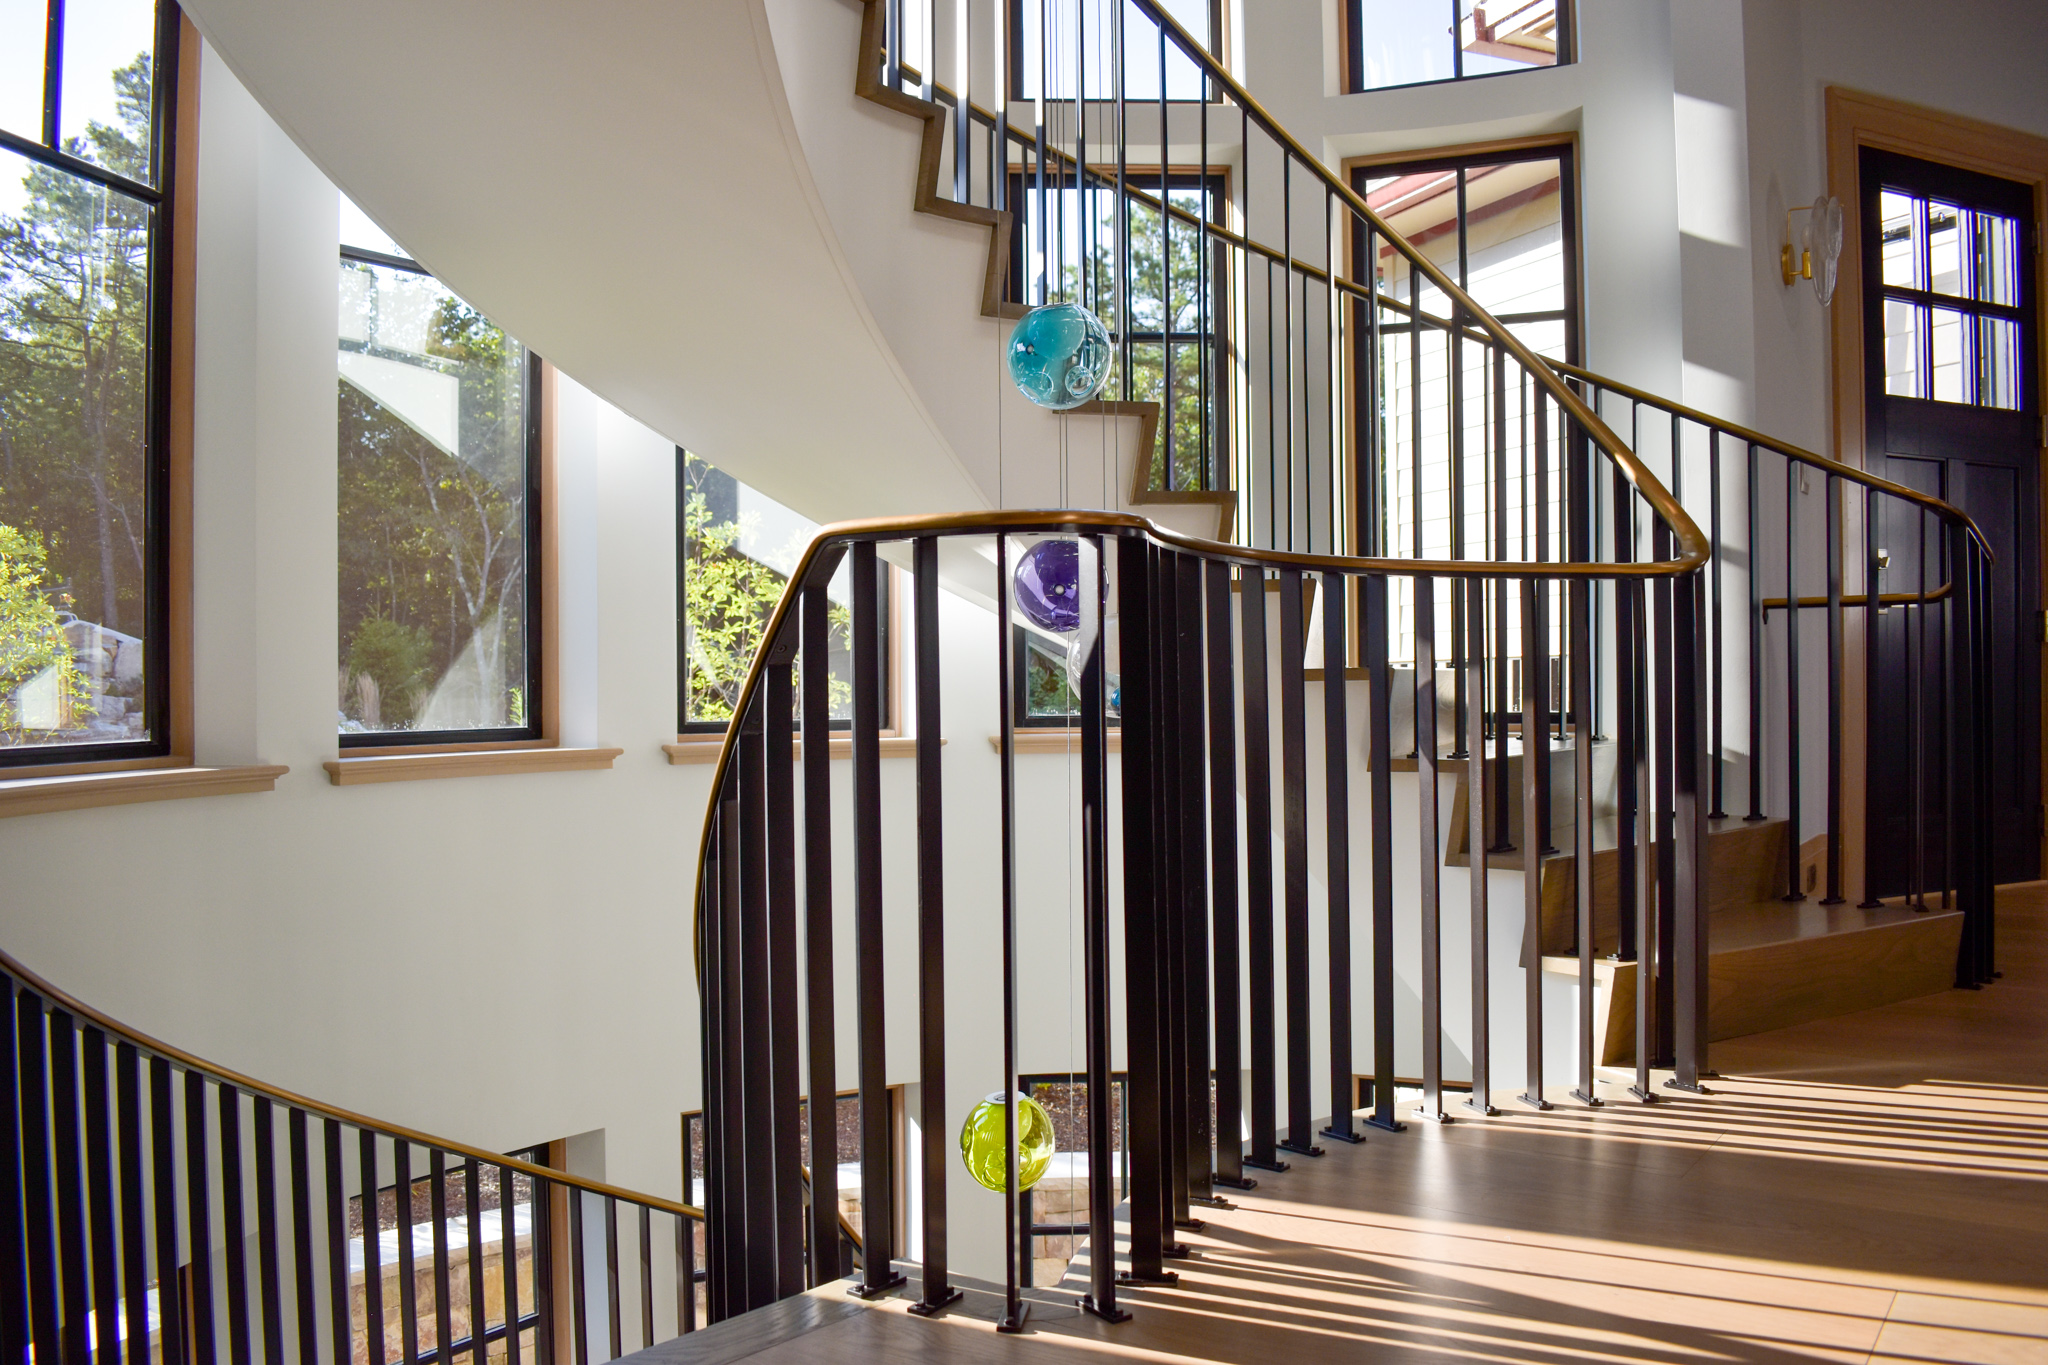 Custom Staircase Construction: A Guide To Wooden Stair Parts